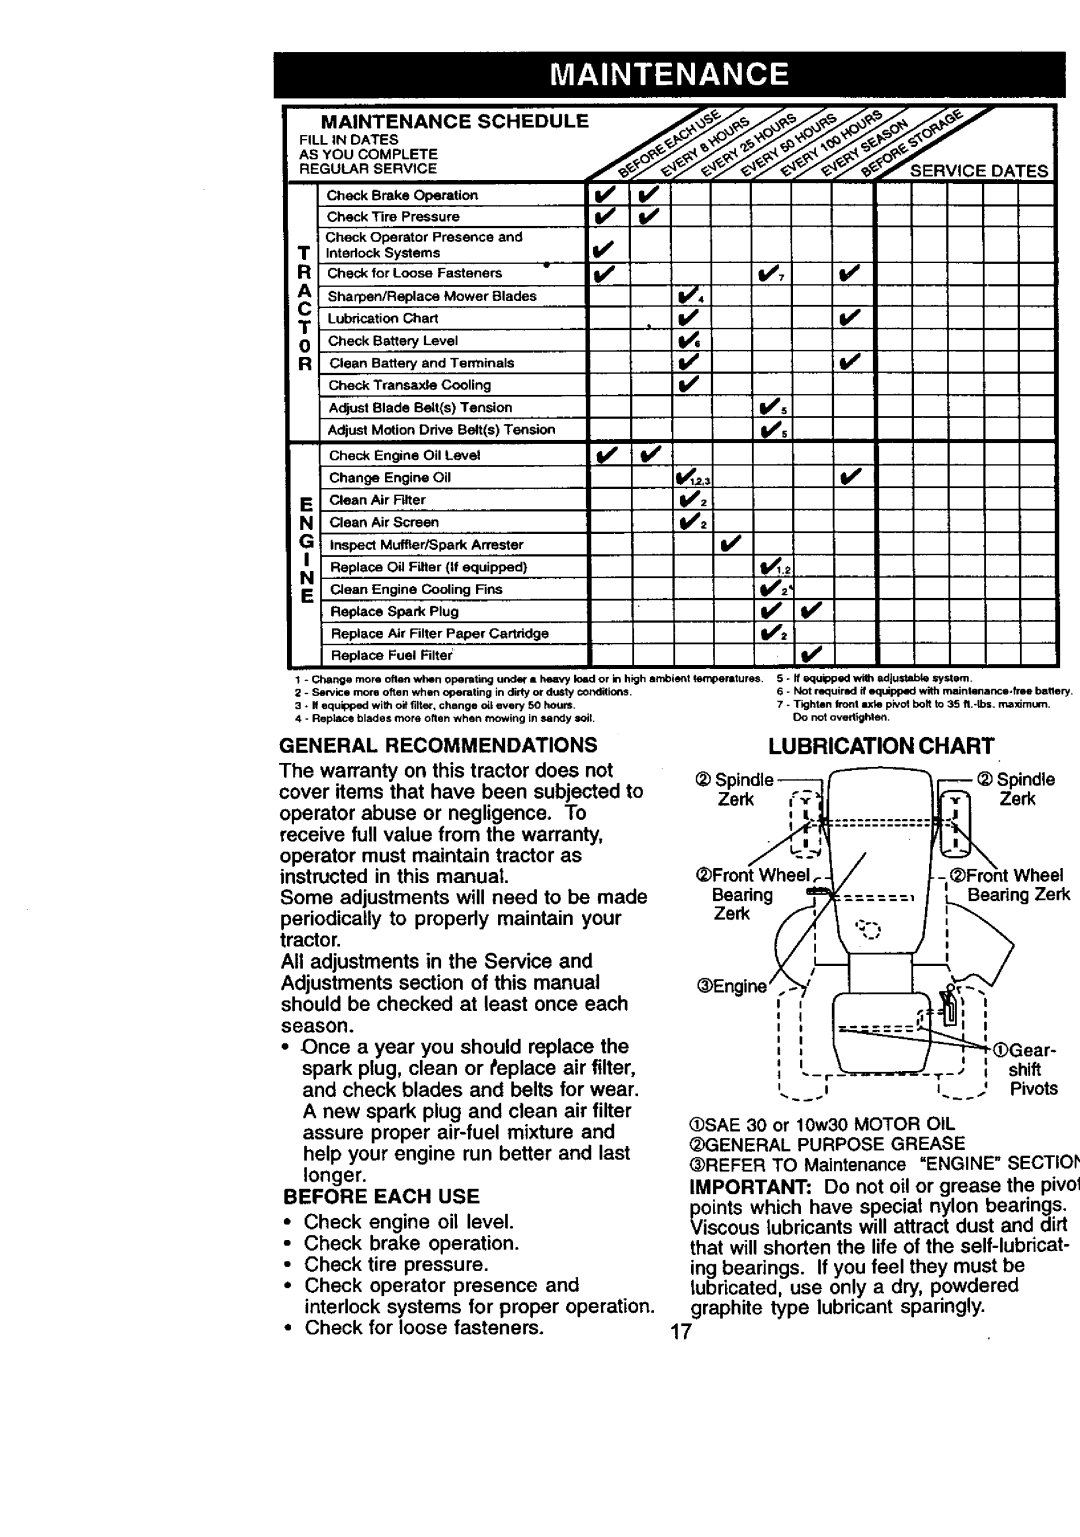 Craftsman 917.270831 owner manual Lubrication Chart, General Recommendations, Before Each USE, Ates 